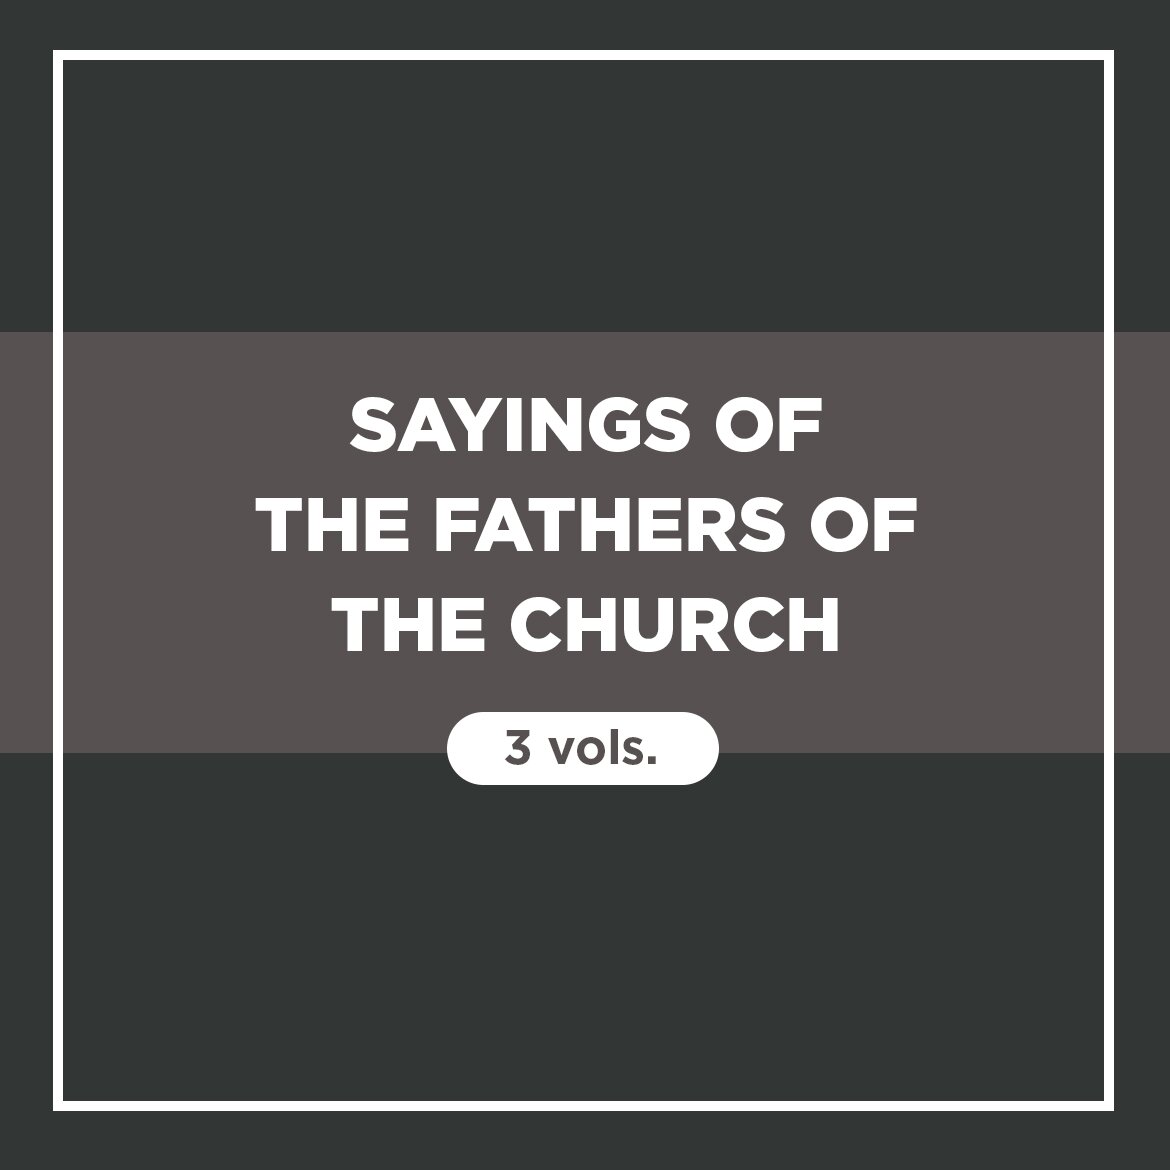 Sayings of the Fathers of the Church (3 vols.)